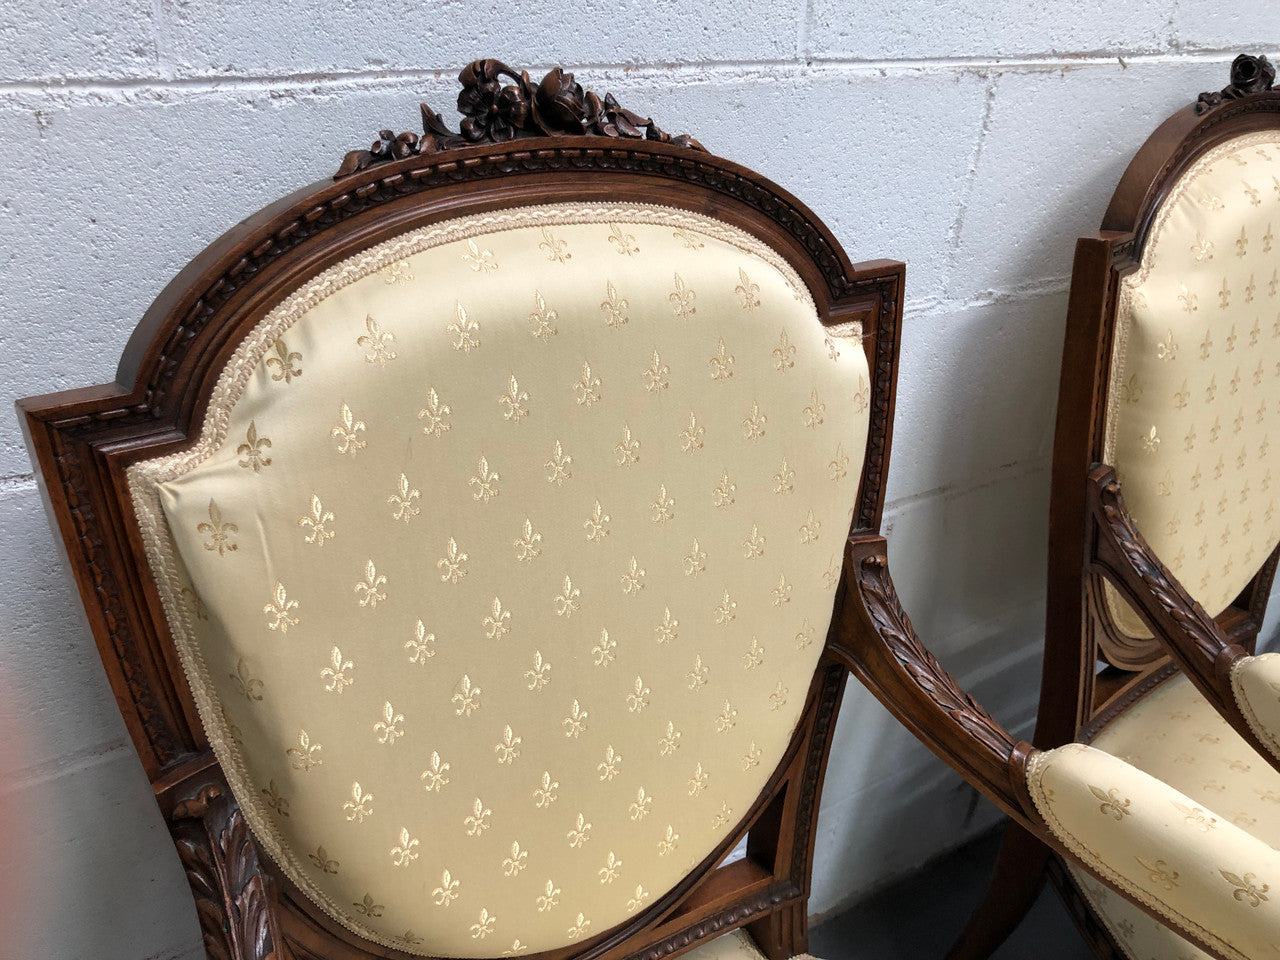 Beautiful pair of Vintage French Walnut Louis XVI style carved Fauteuils with lovely upholstery and wide seats . In good original detailed condition.